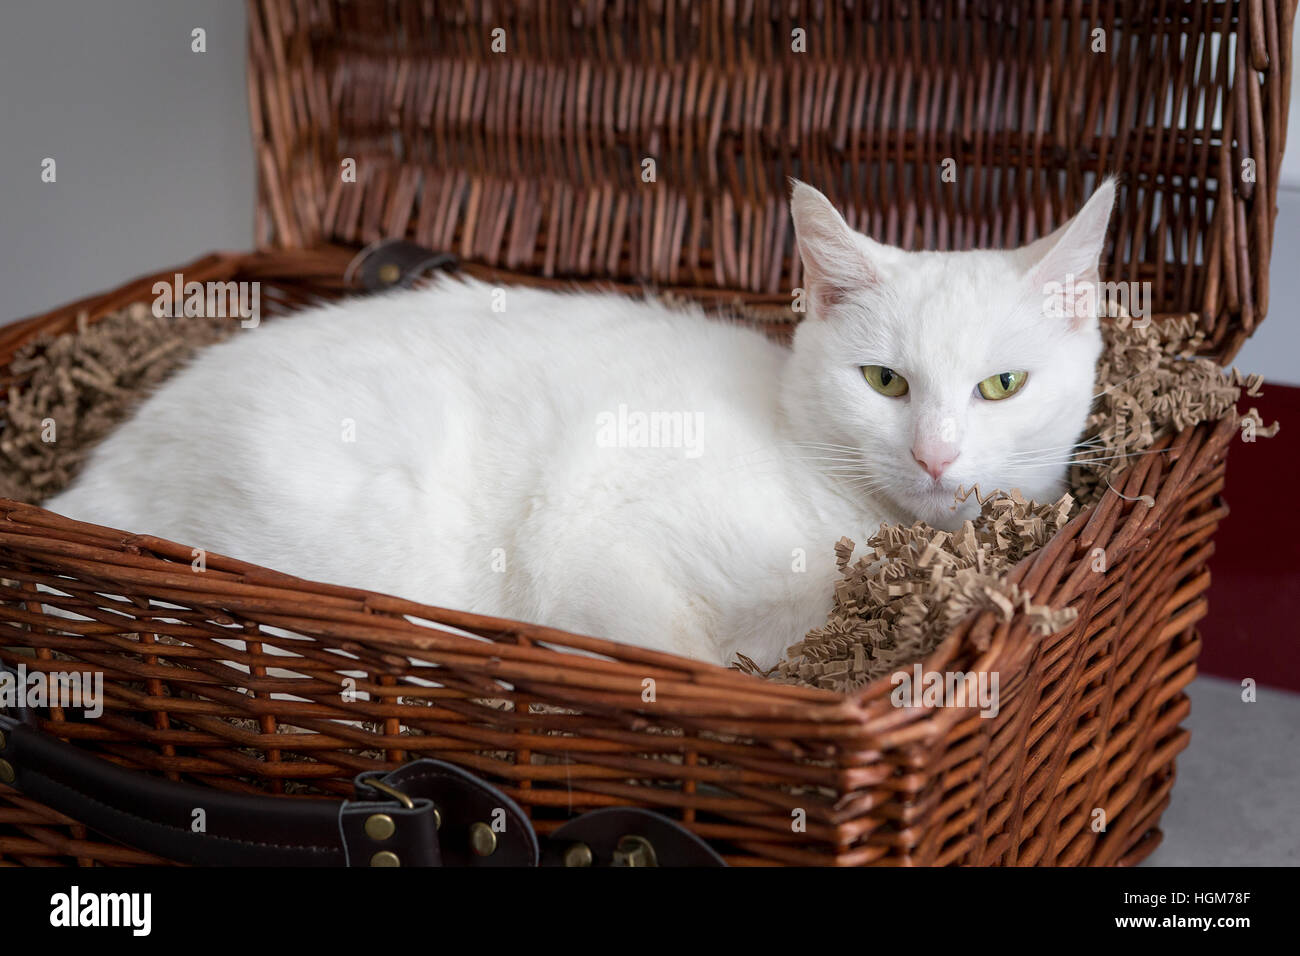 White cat resting in a wicker food hamper on a kitchen worksurface Stock Photo